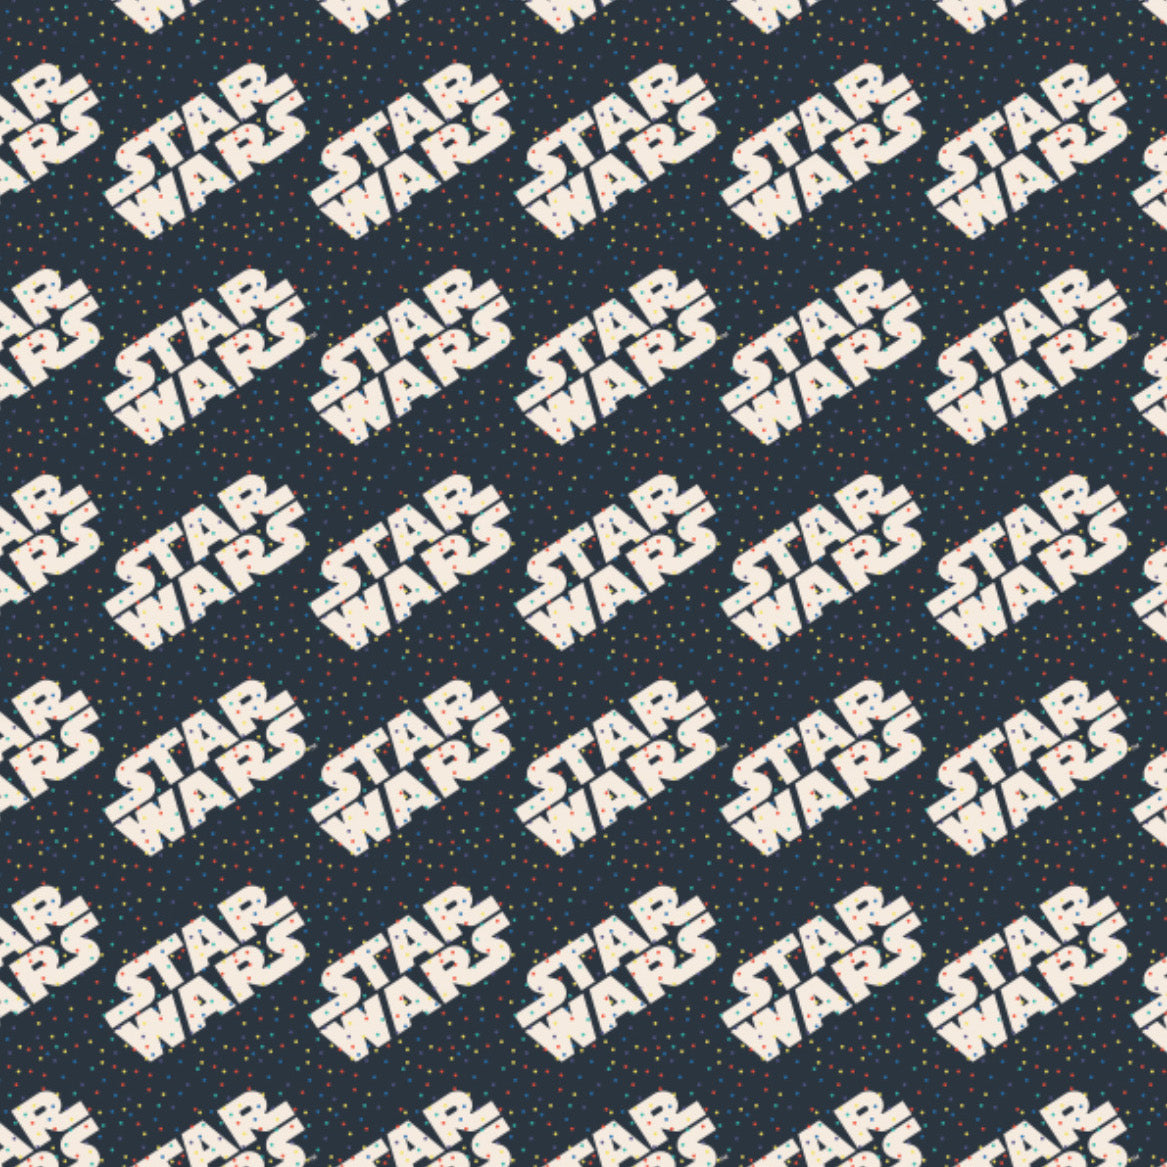 Star Wars Logo and Tiny Dots, Craft Cotton Co